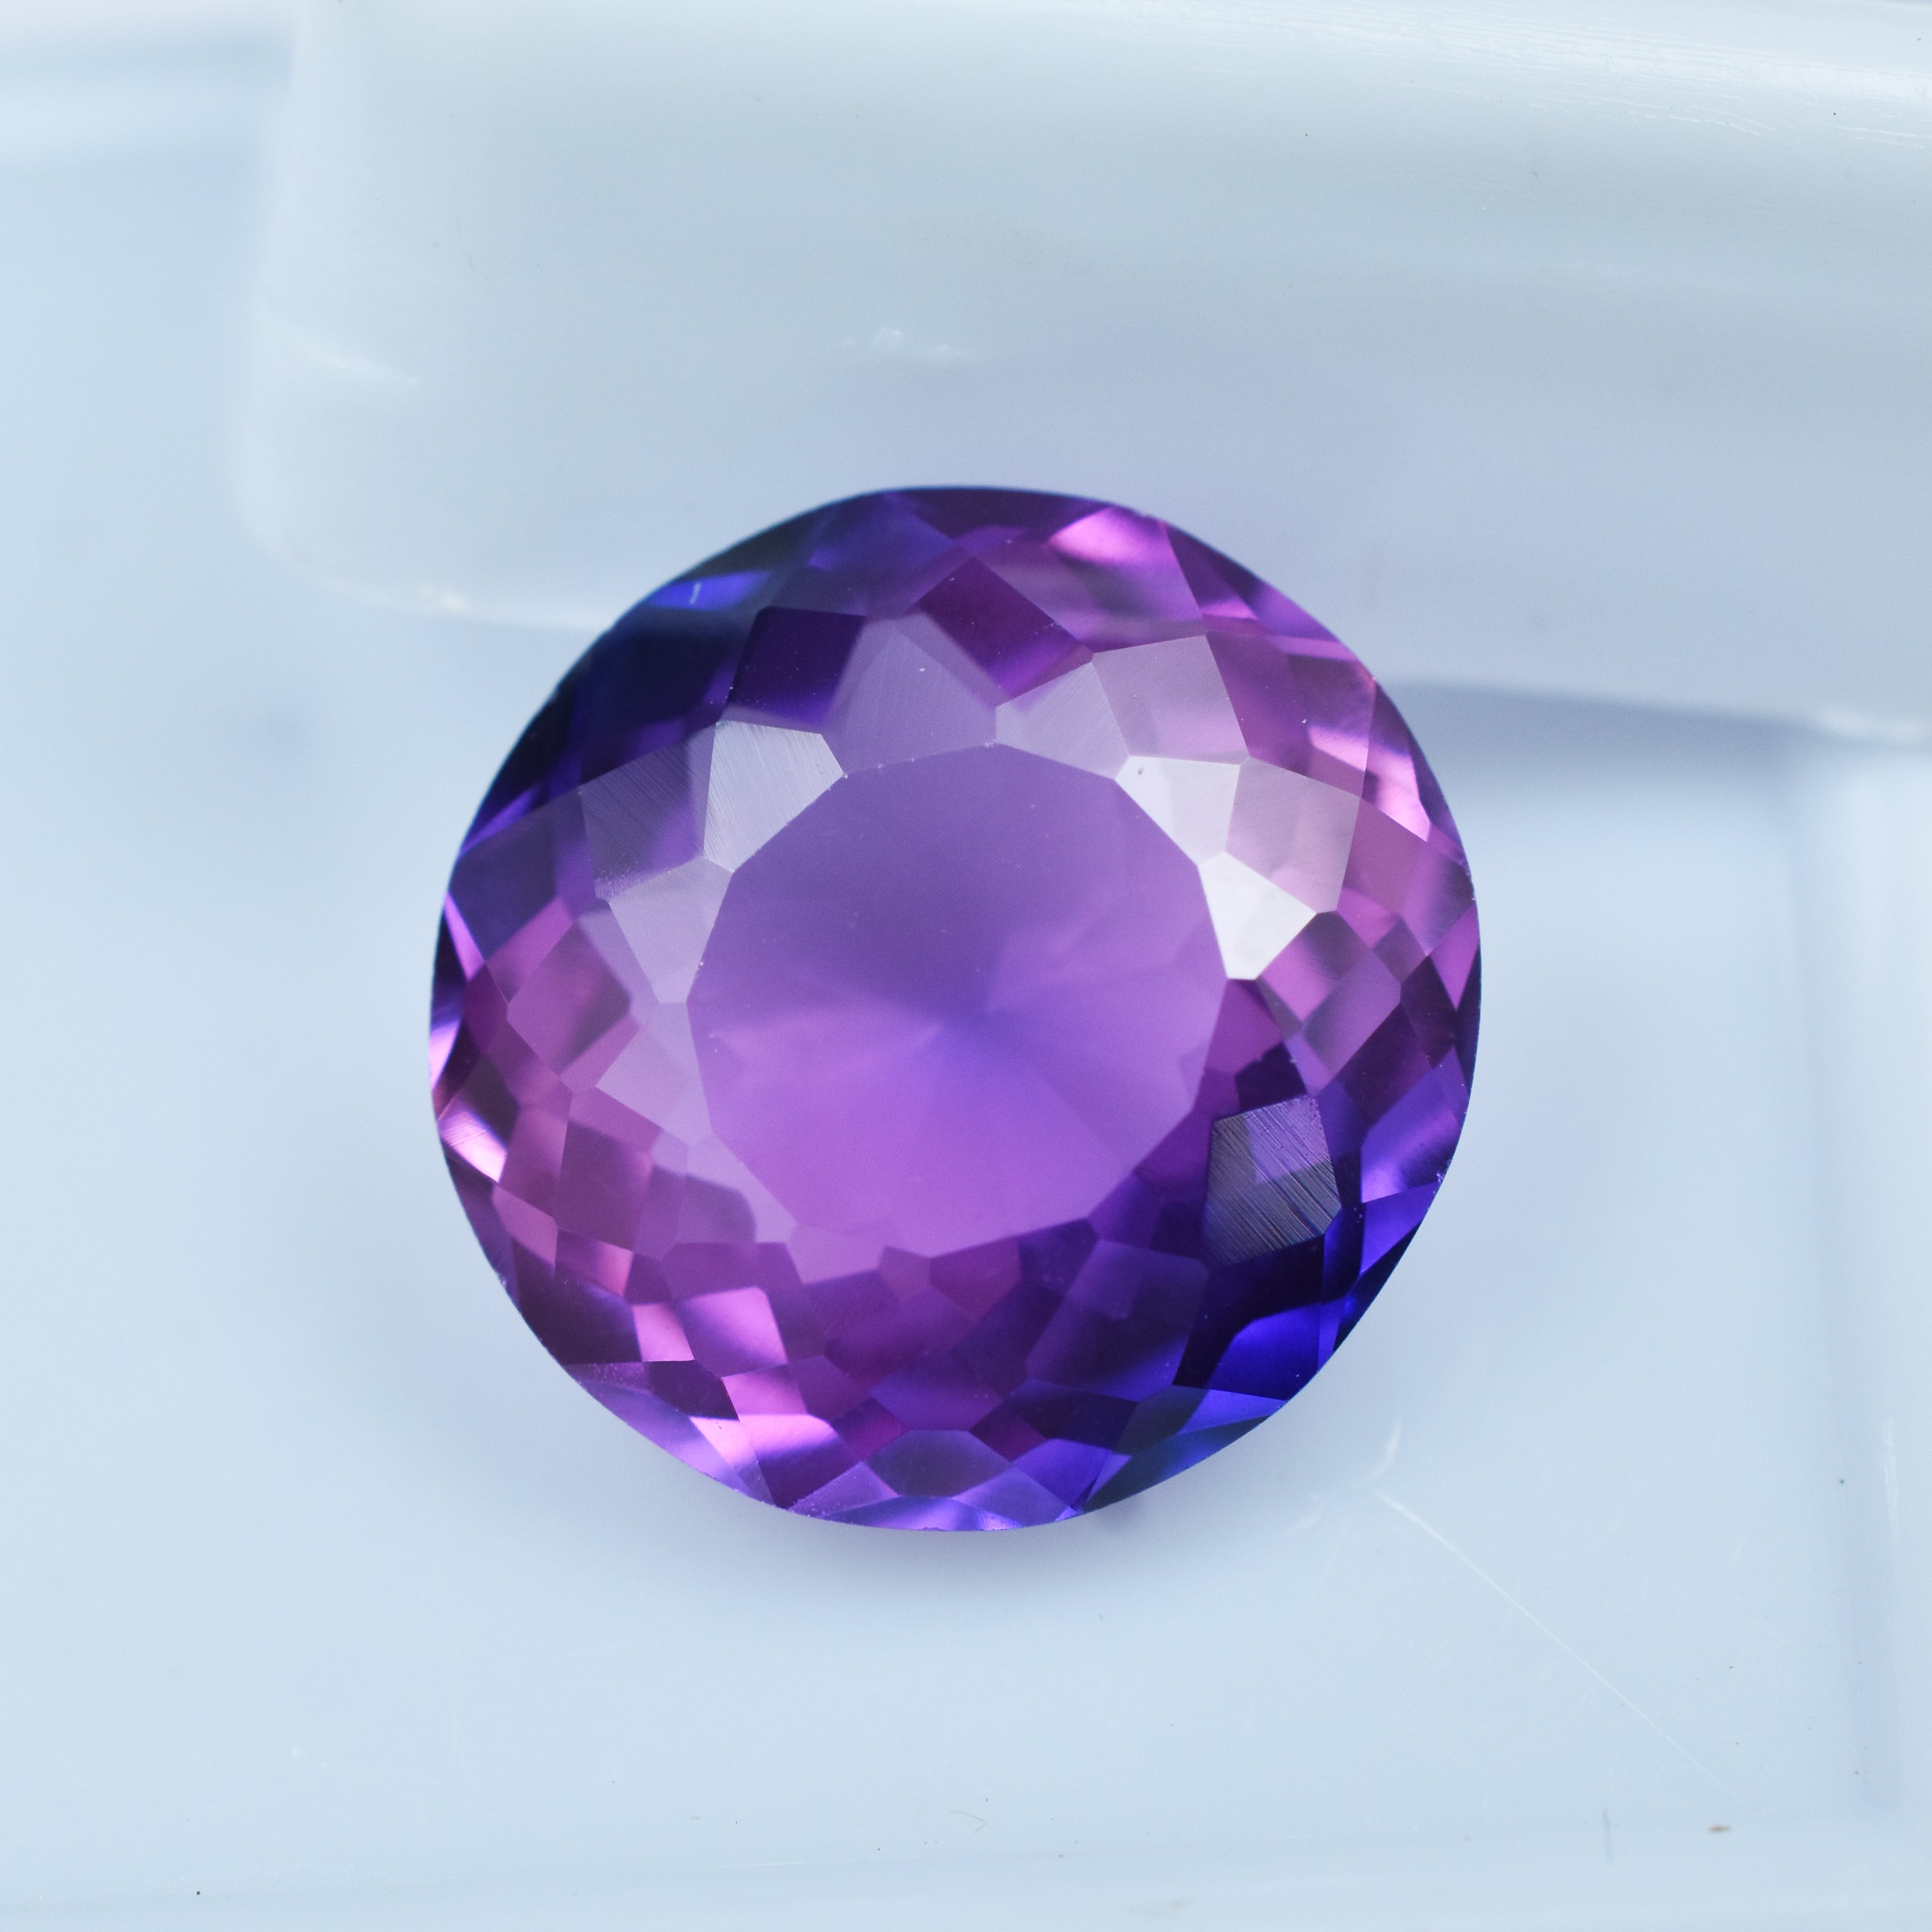 Superior Gemstone !!! Natural Purple Sapphire Gem 7.35 Ct Round Shape Color Change Certified Loose Gemstone, Stone For Ring , Use As A Gift